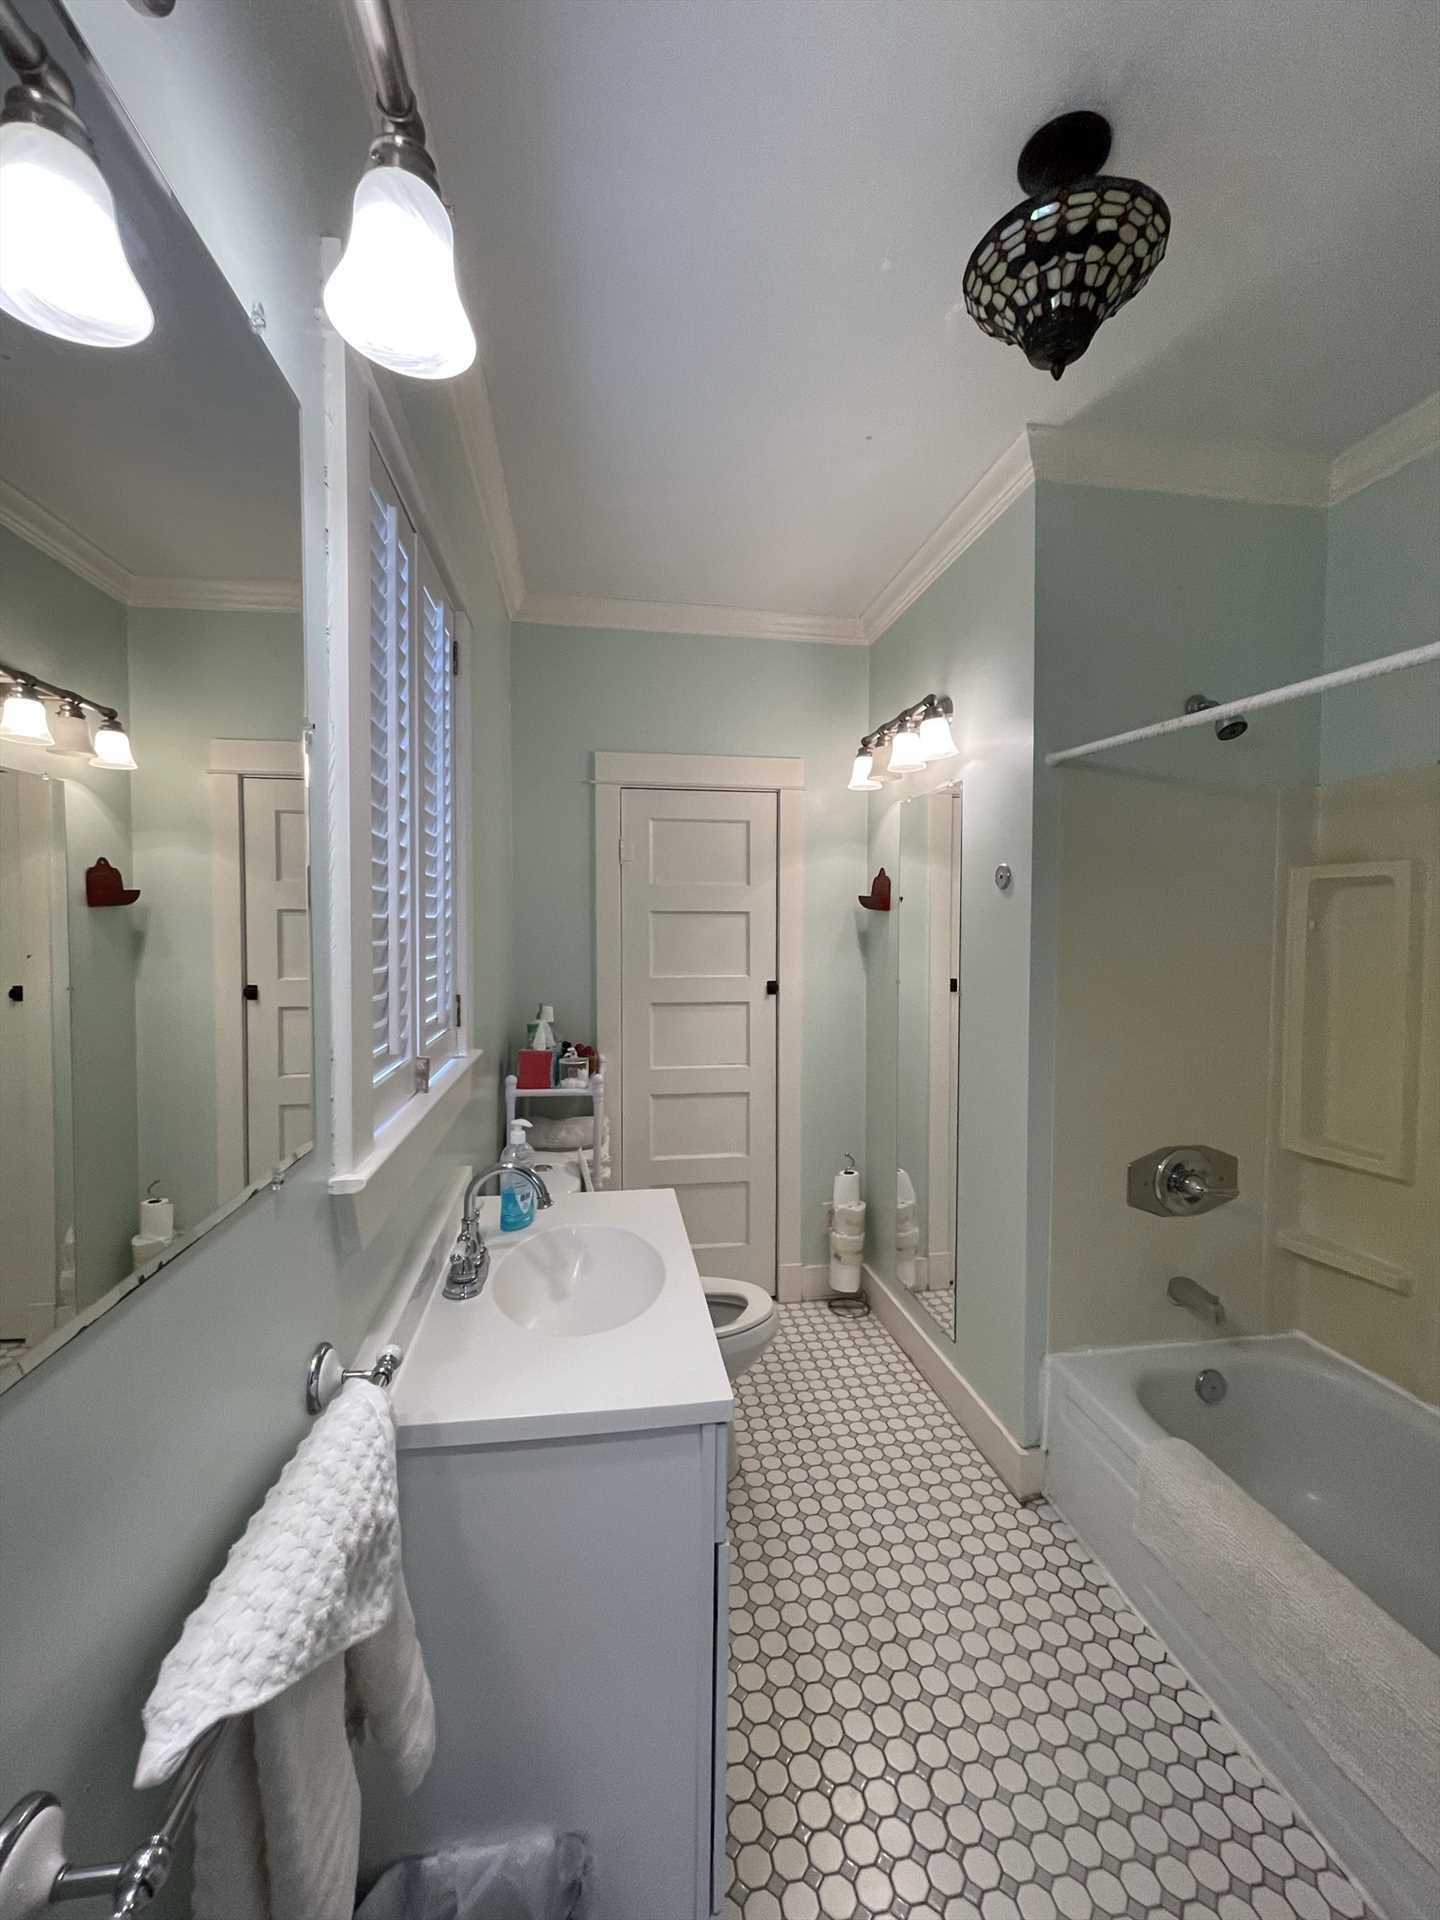                                                 Bright, airy, and spotlessly clean, the bathroom includes a tub and shower combo. Fresh bath linens are also provided.